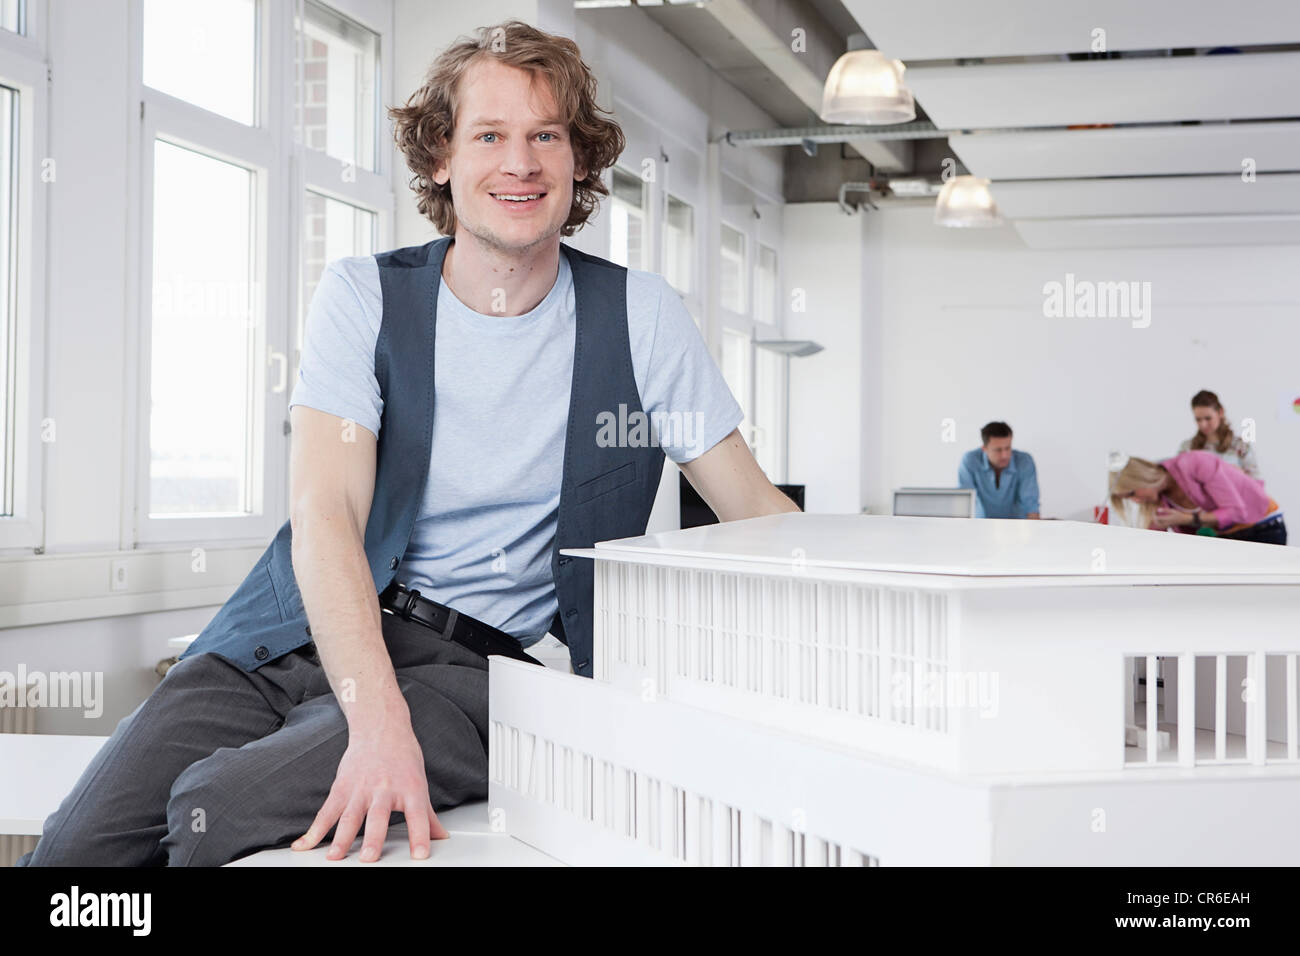 Germany, Bavaria, Munich, Architect with architectural model, colleagues working in background Stock Photo